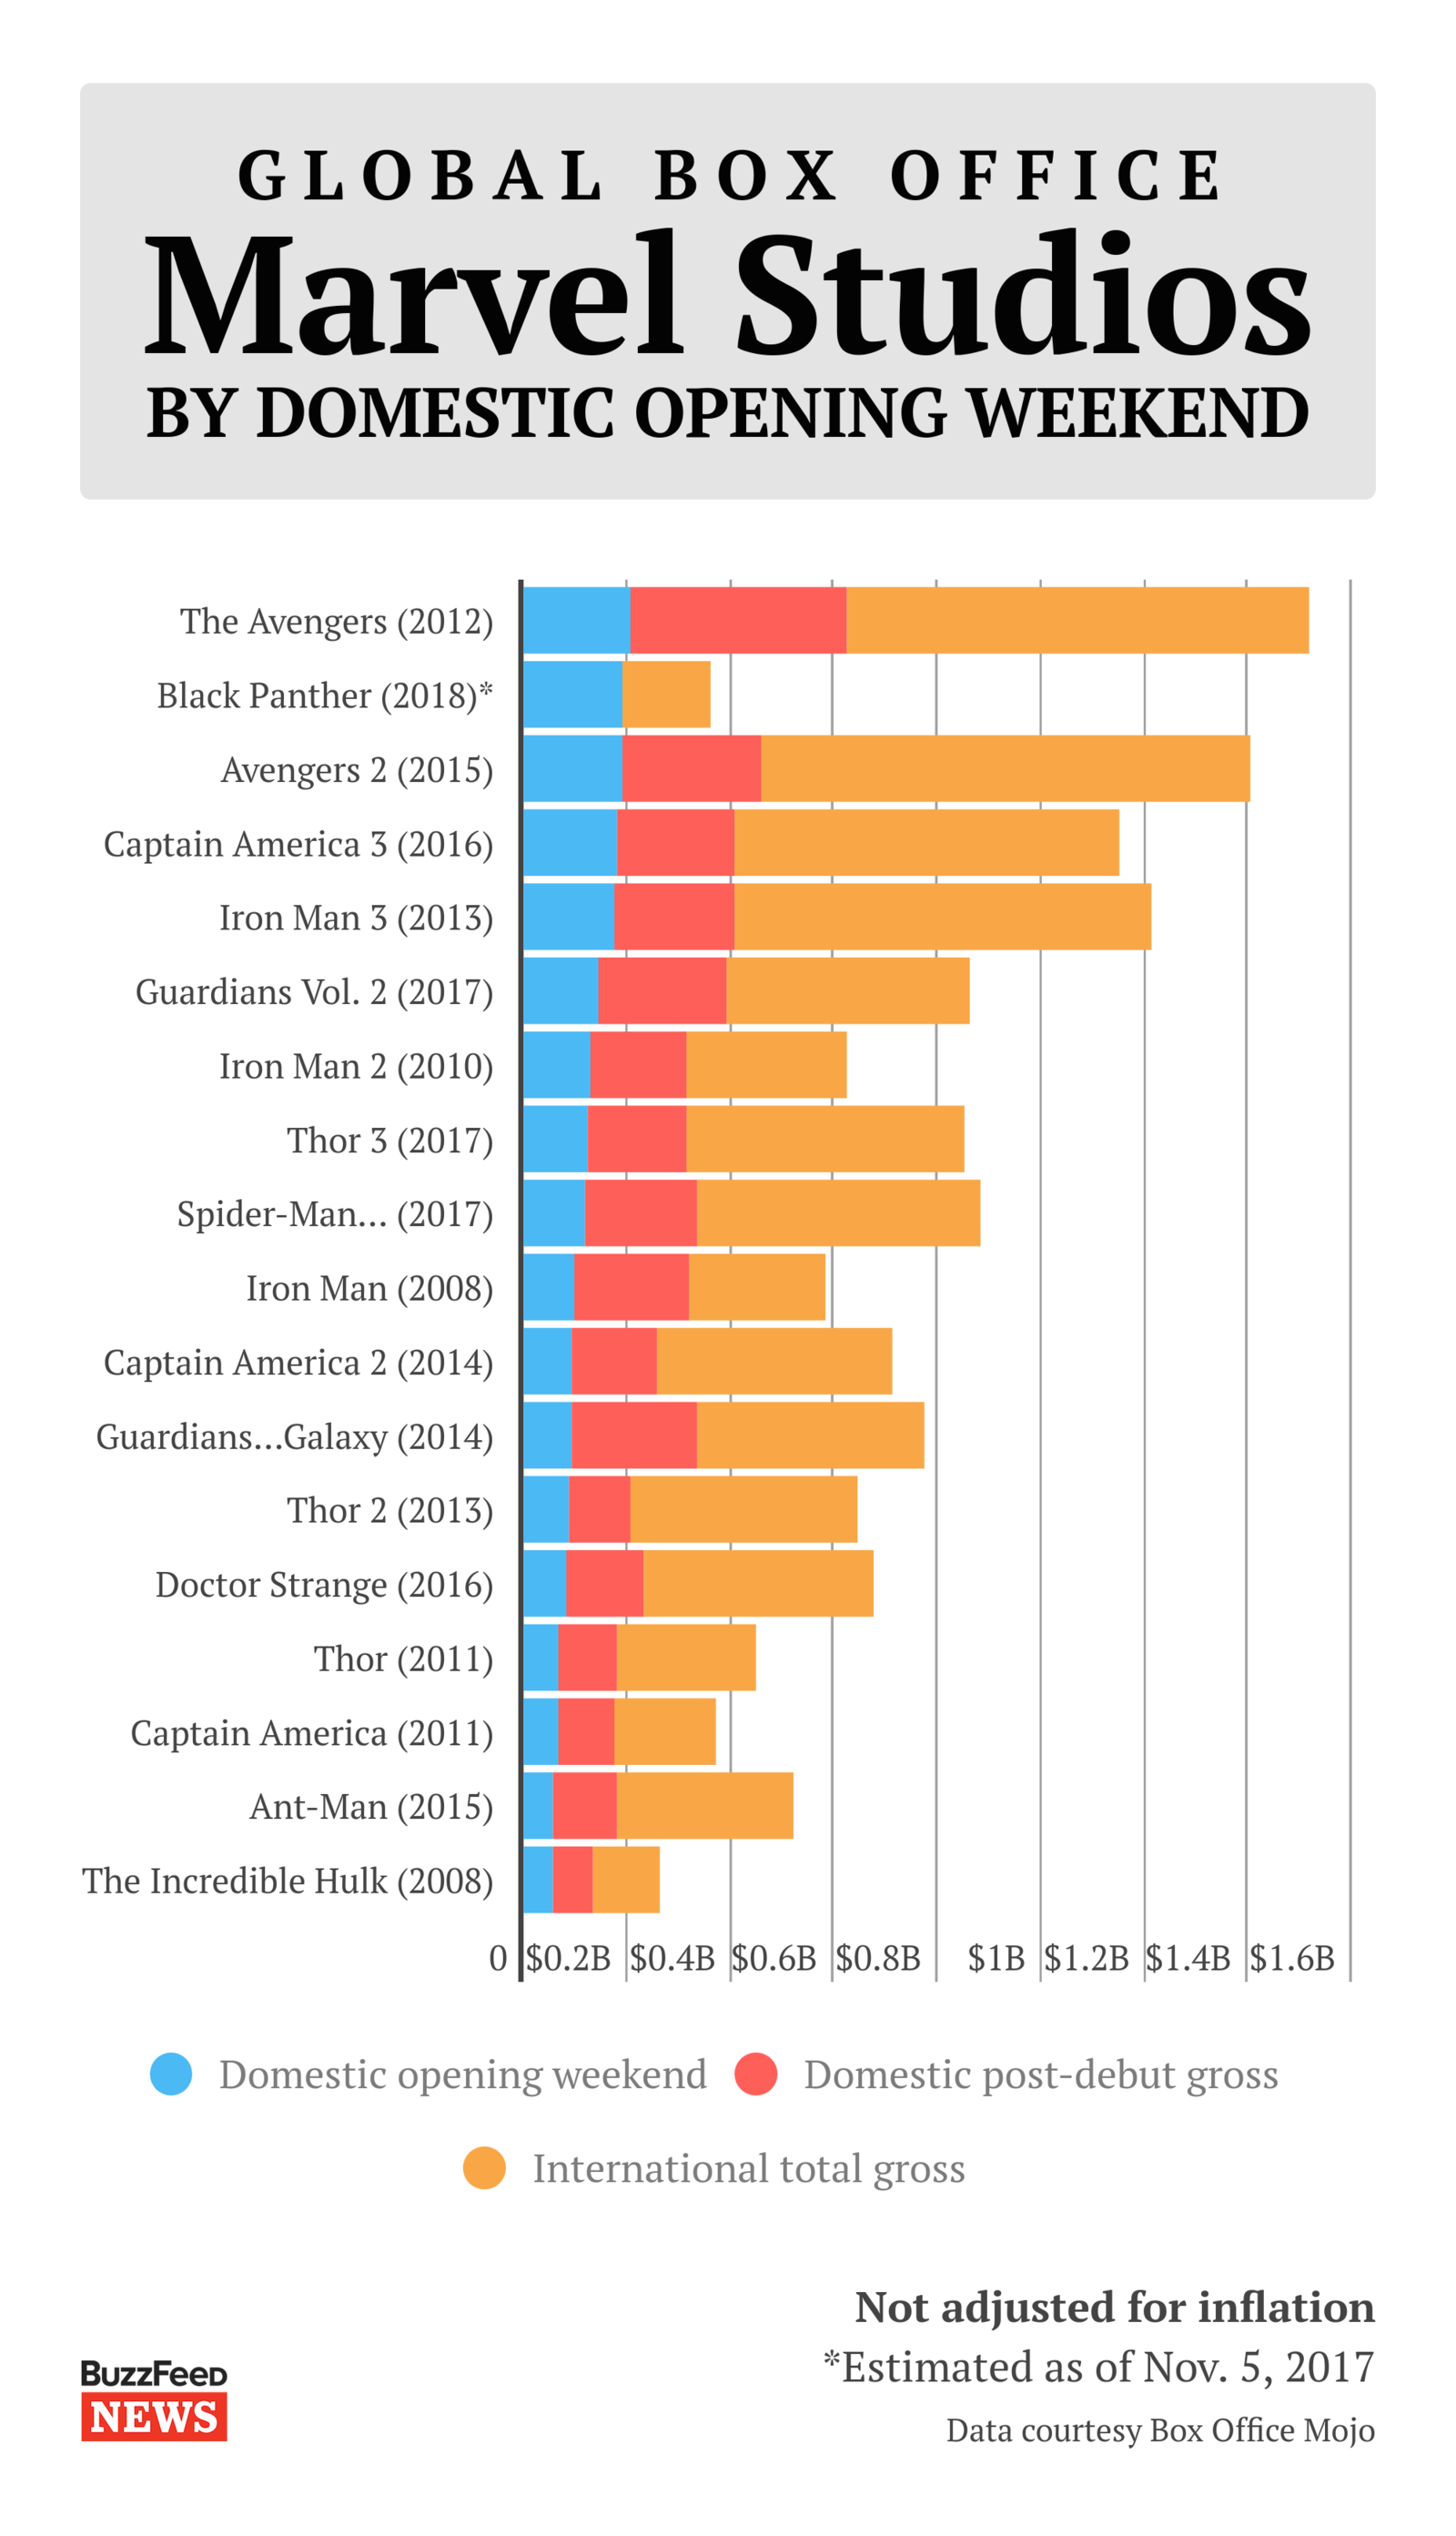 The Marvels' opening weekend box office earning